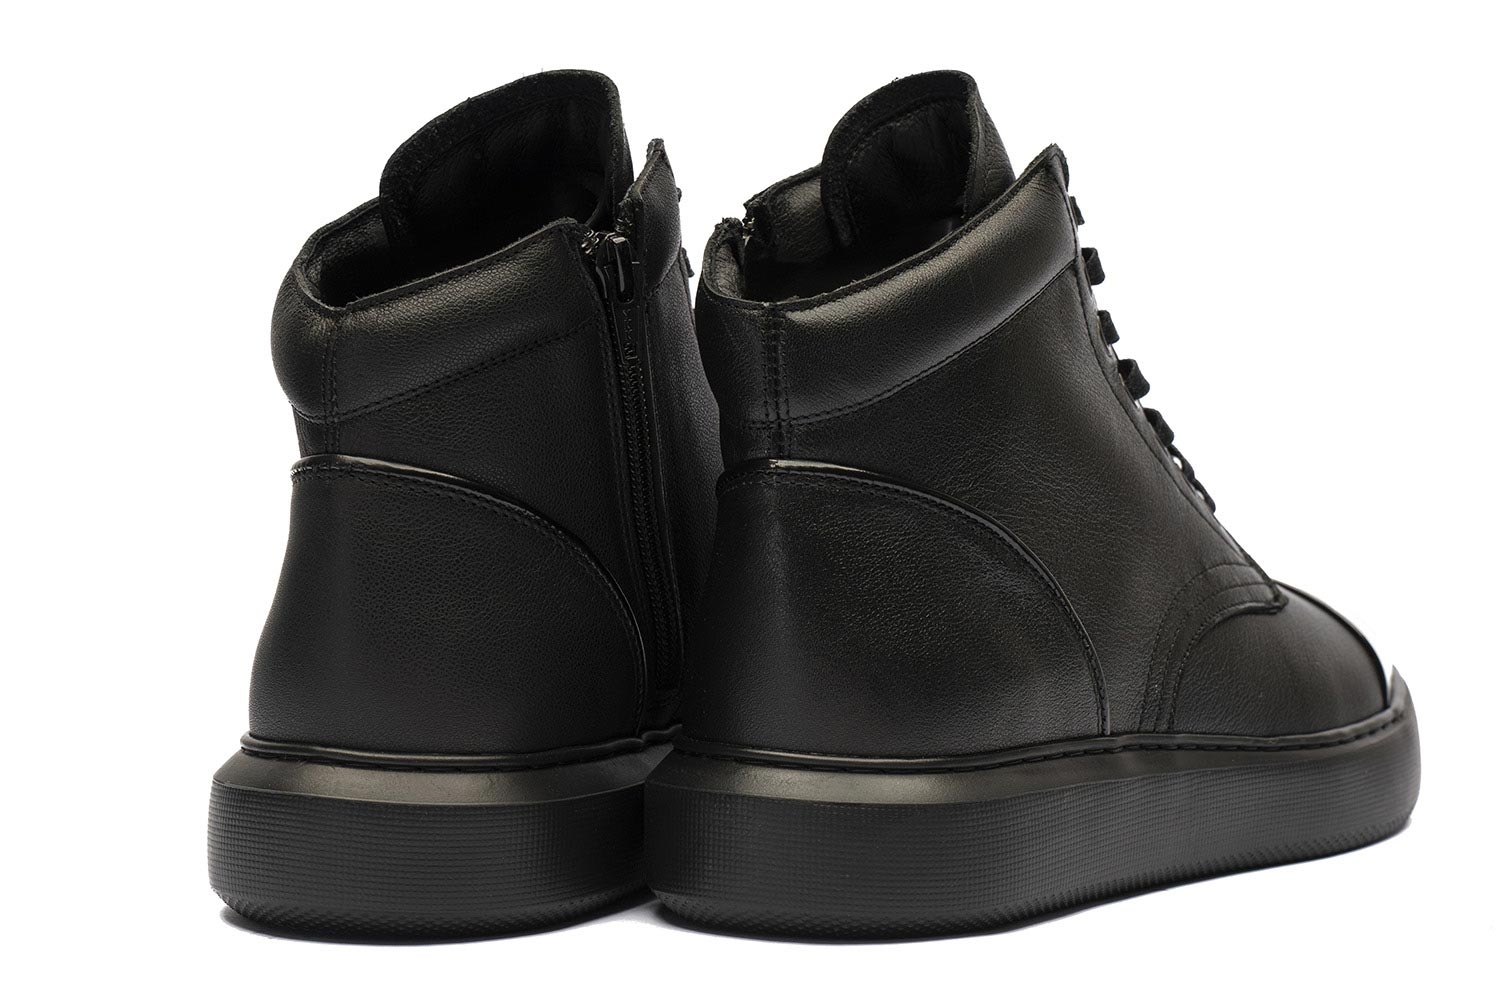 Black genuine leather shoes 2